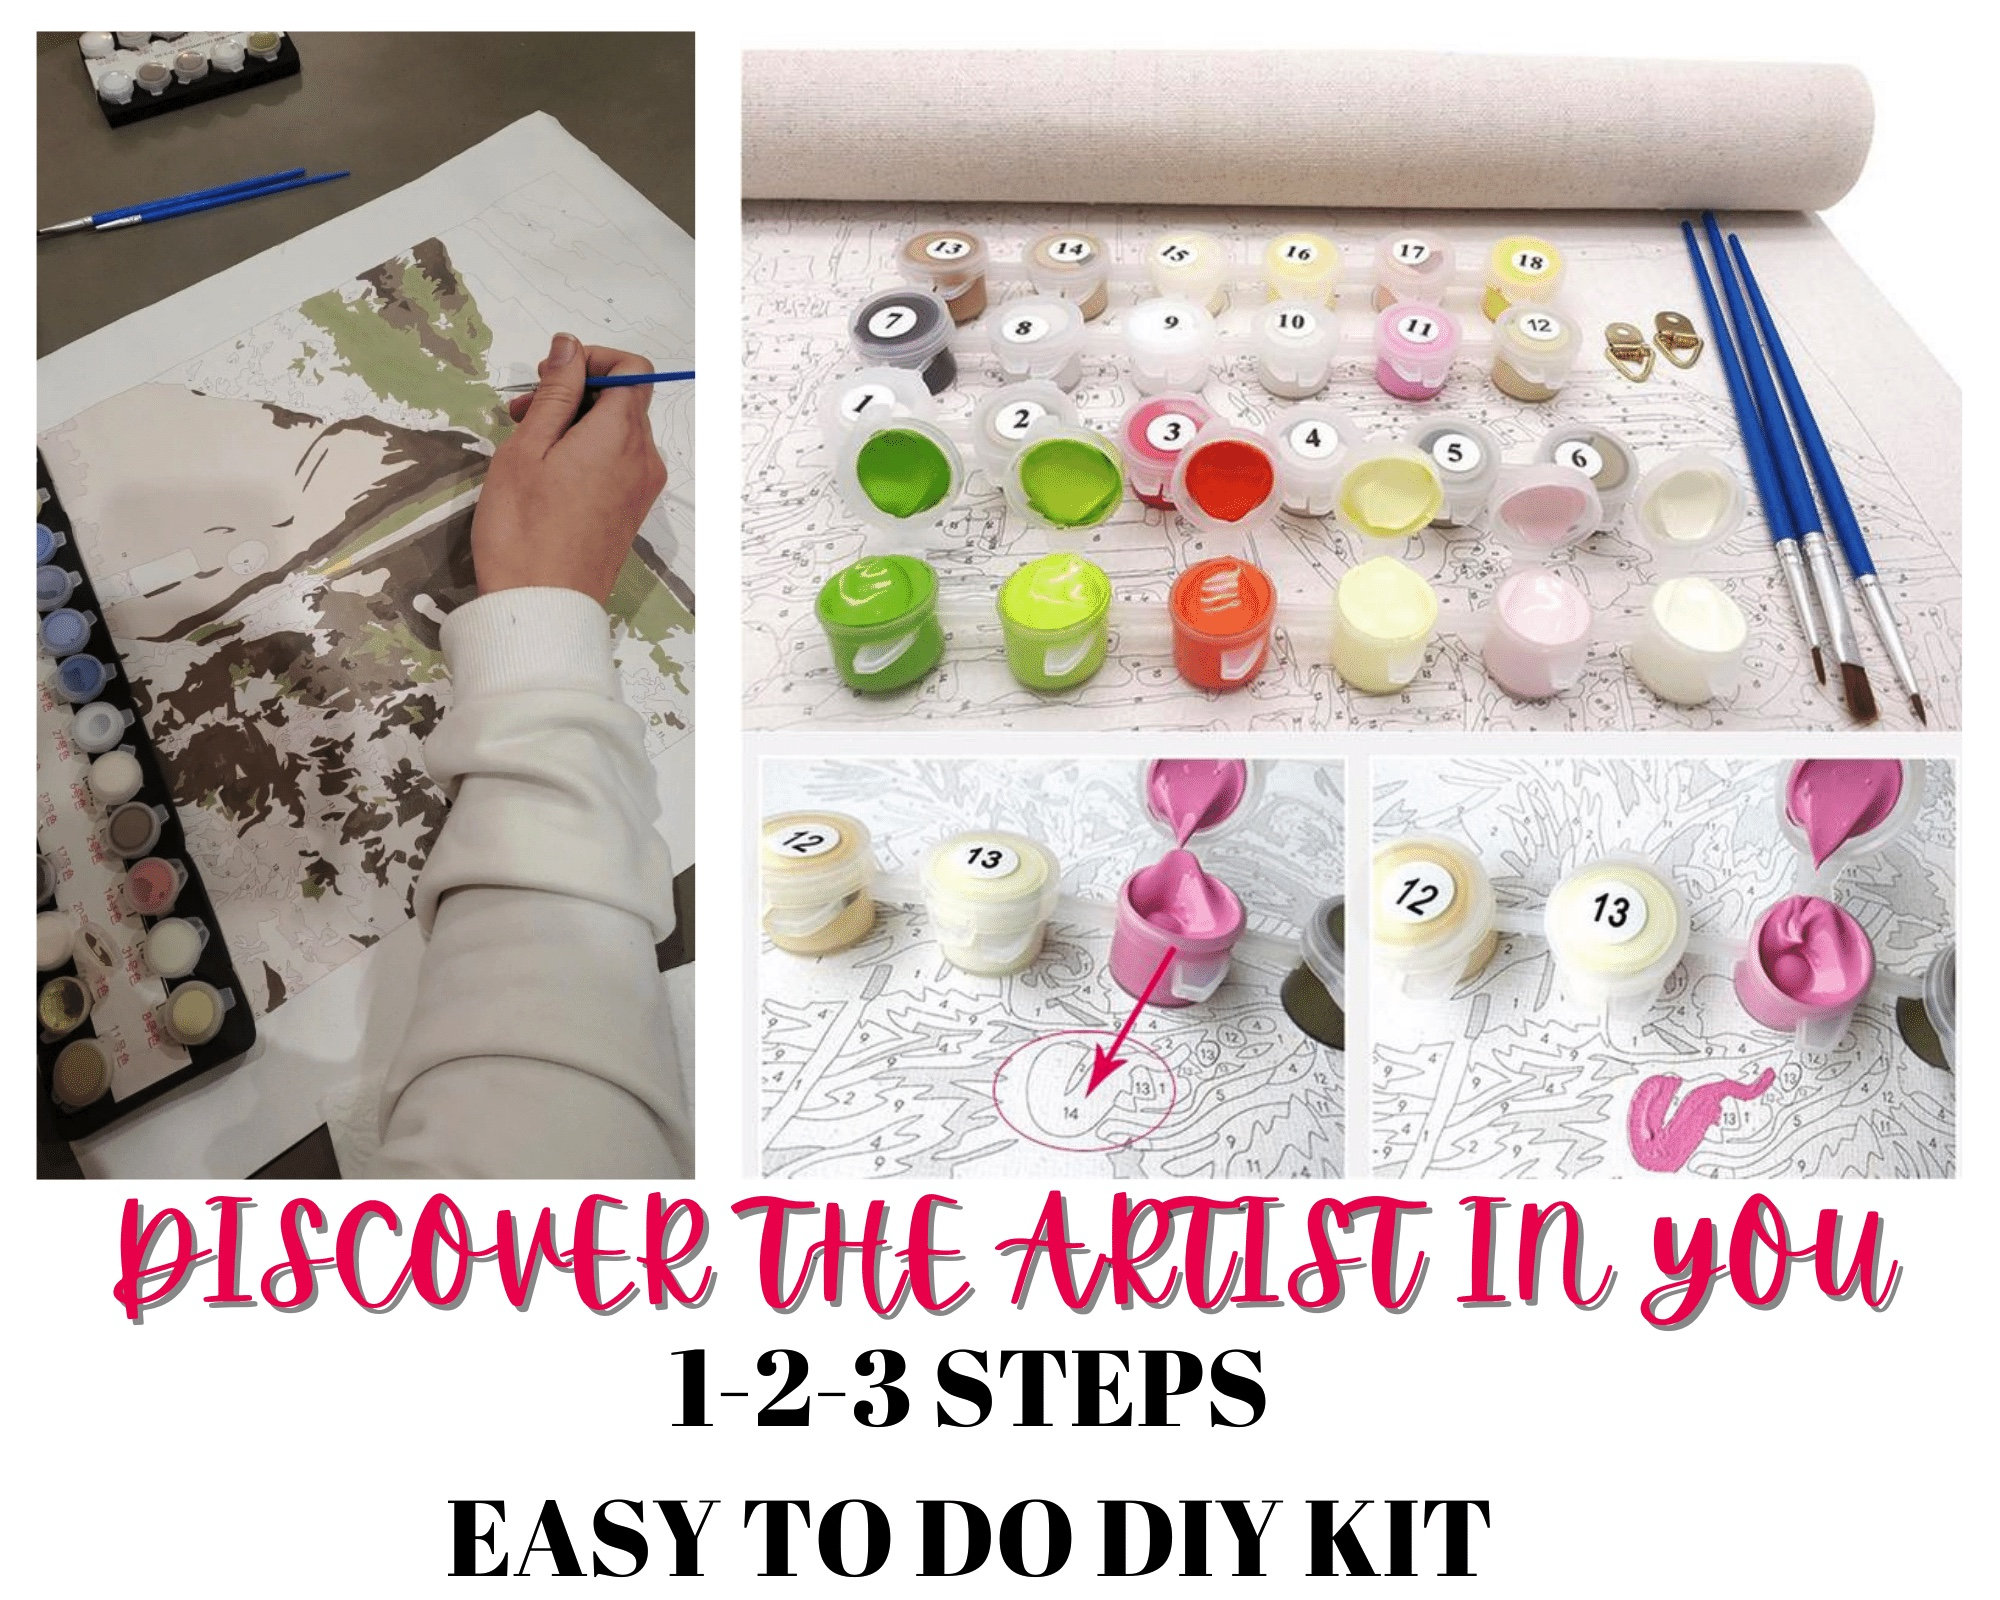  CYNART DIY Paint by Numbers for Adults Beginner